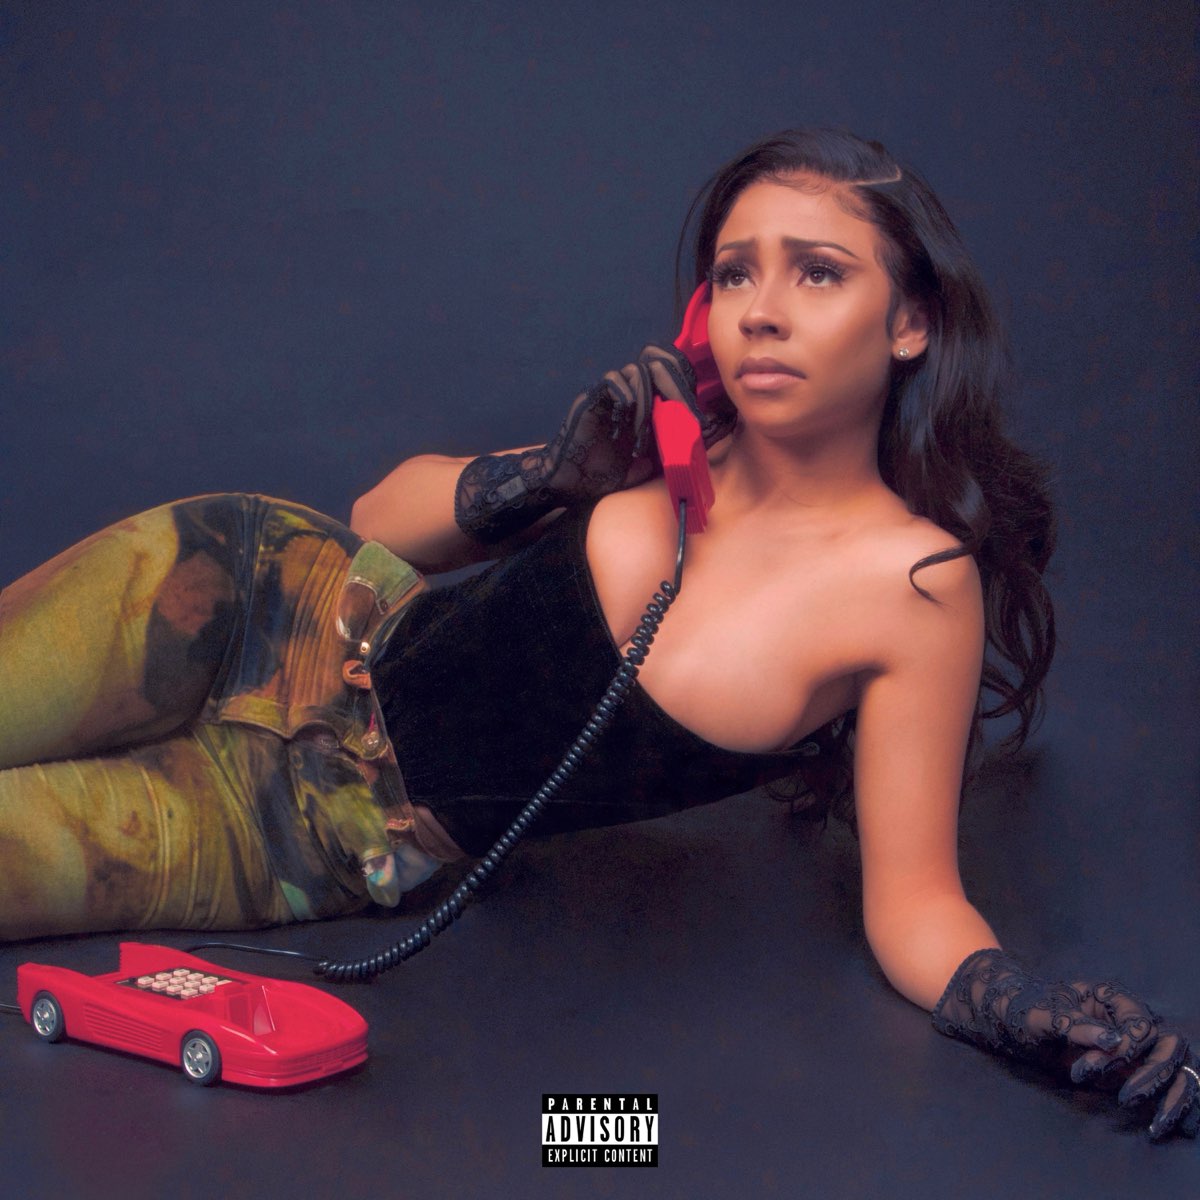 RIP - Single by Mariah the Scientist on Apple Music.